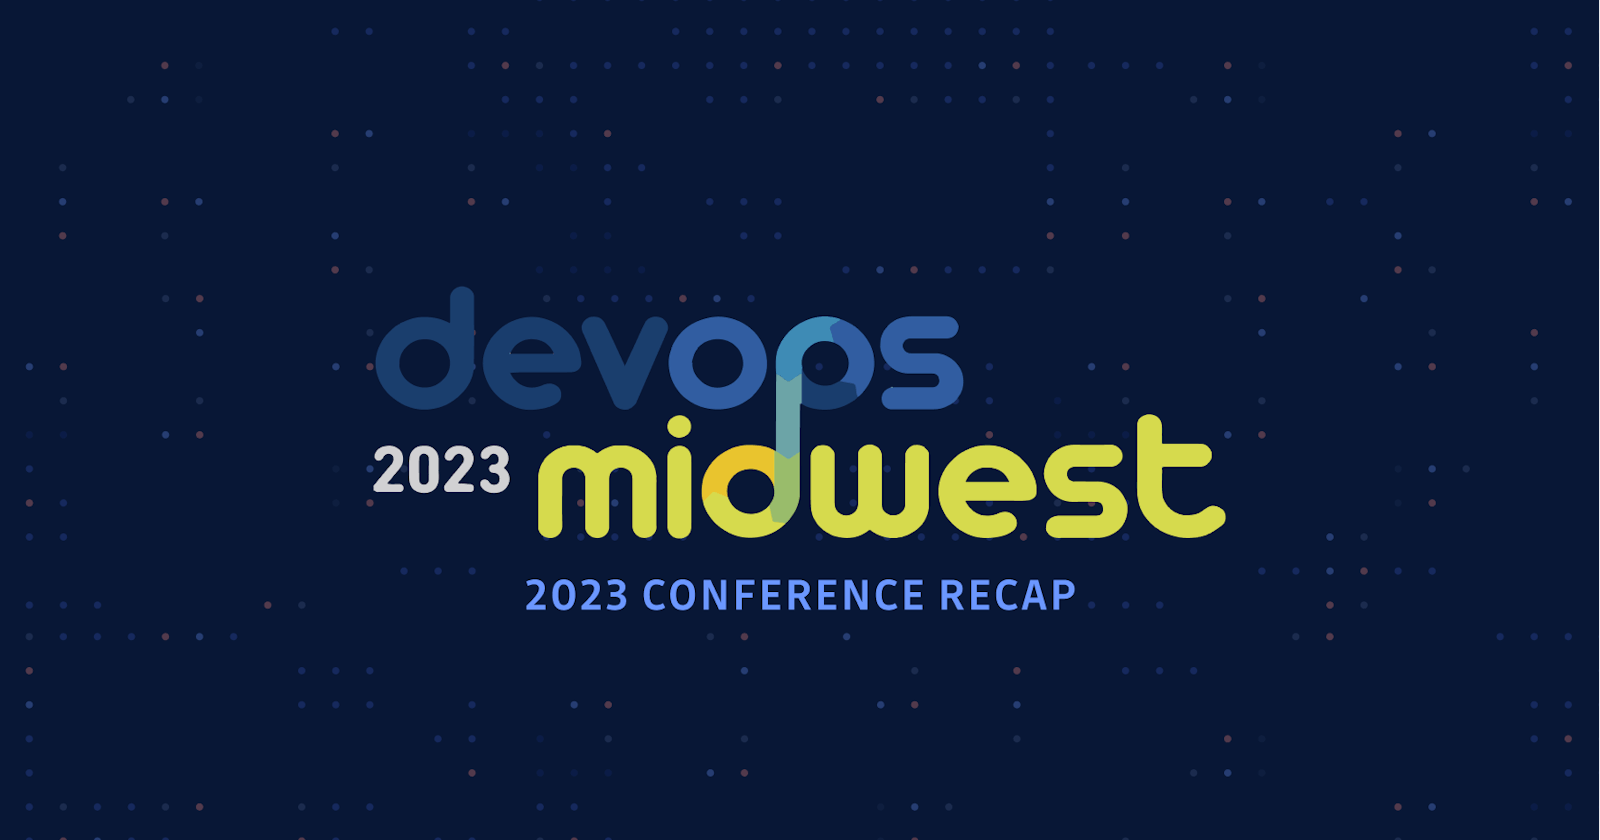 DevOps Midwest - A community event full of DevSecOps best practices.
DevOps Midwest 2023 brought together experts in scale, availability, and security